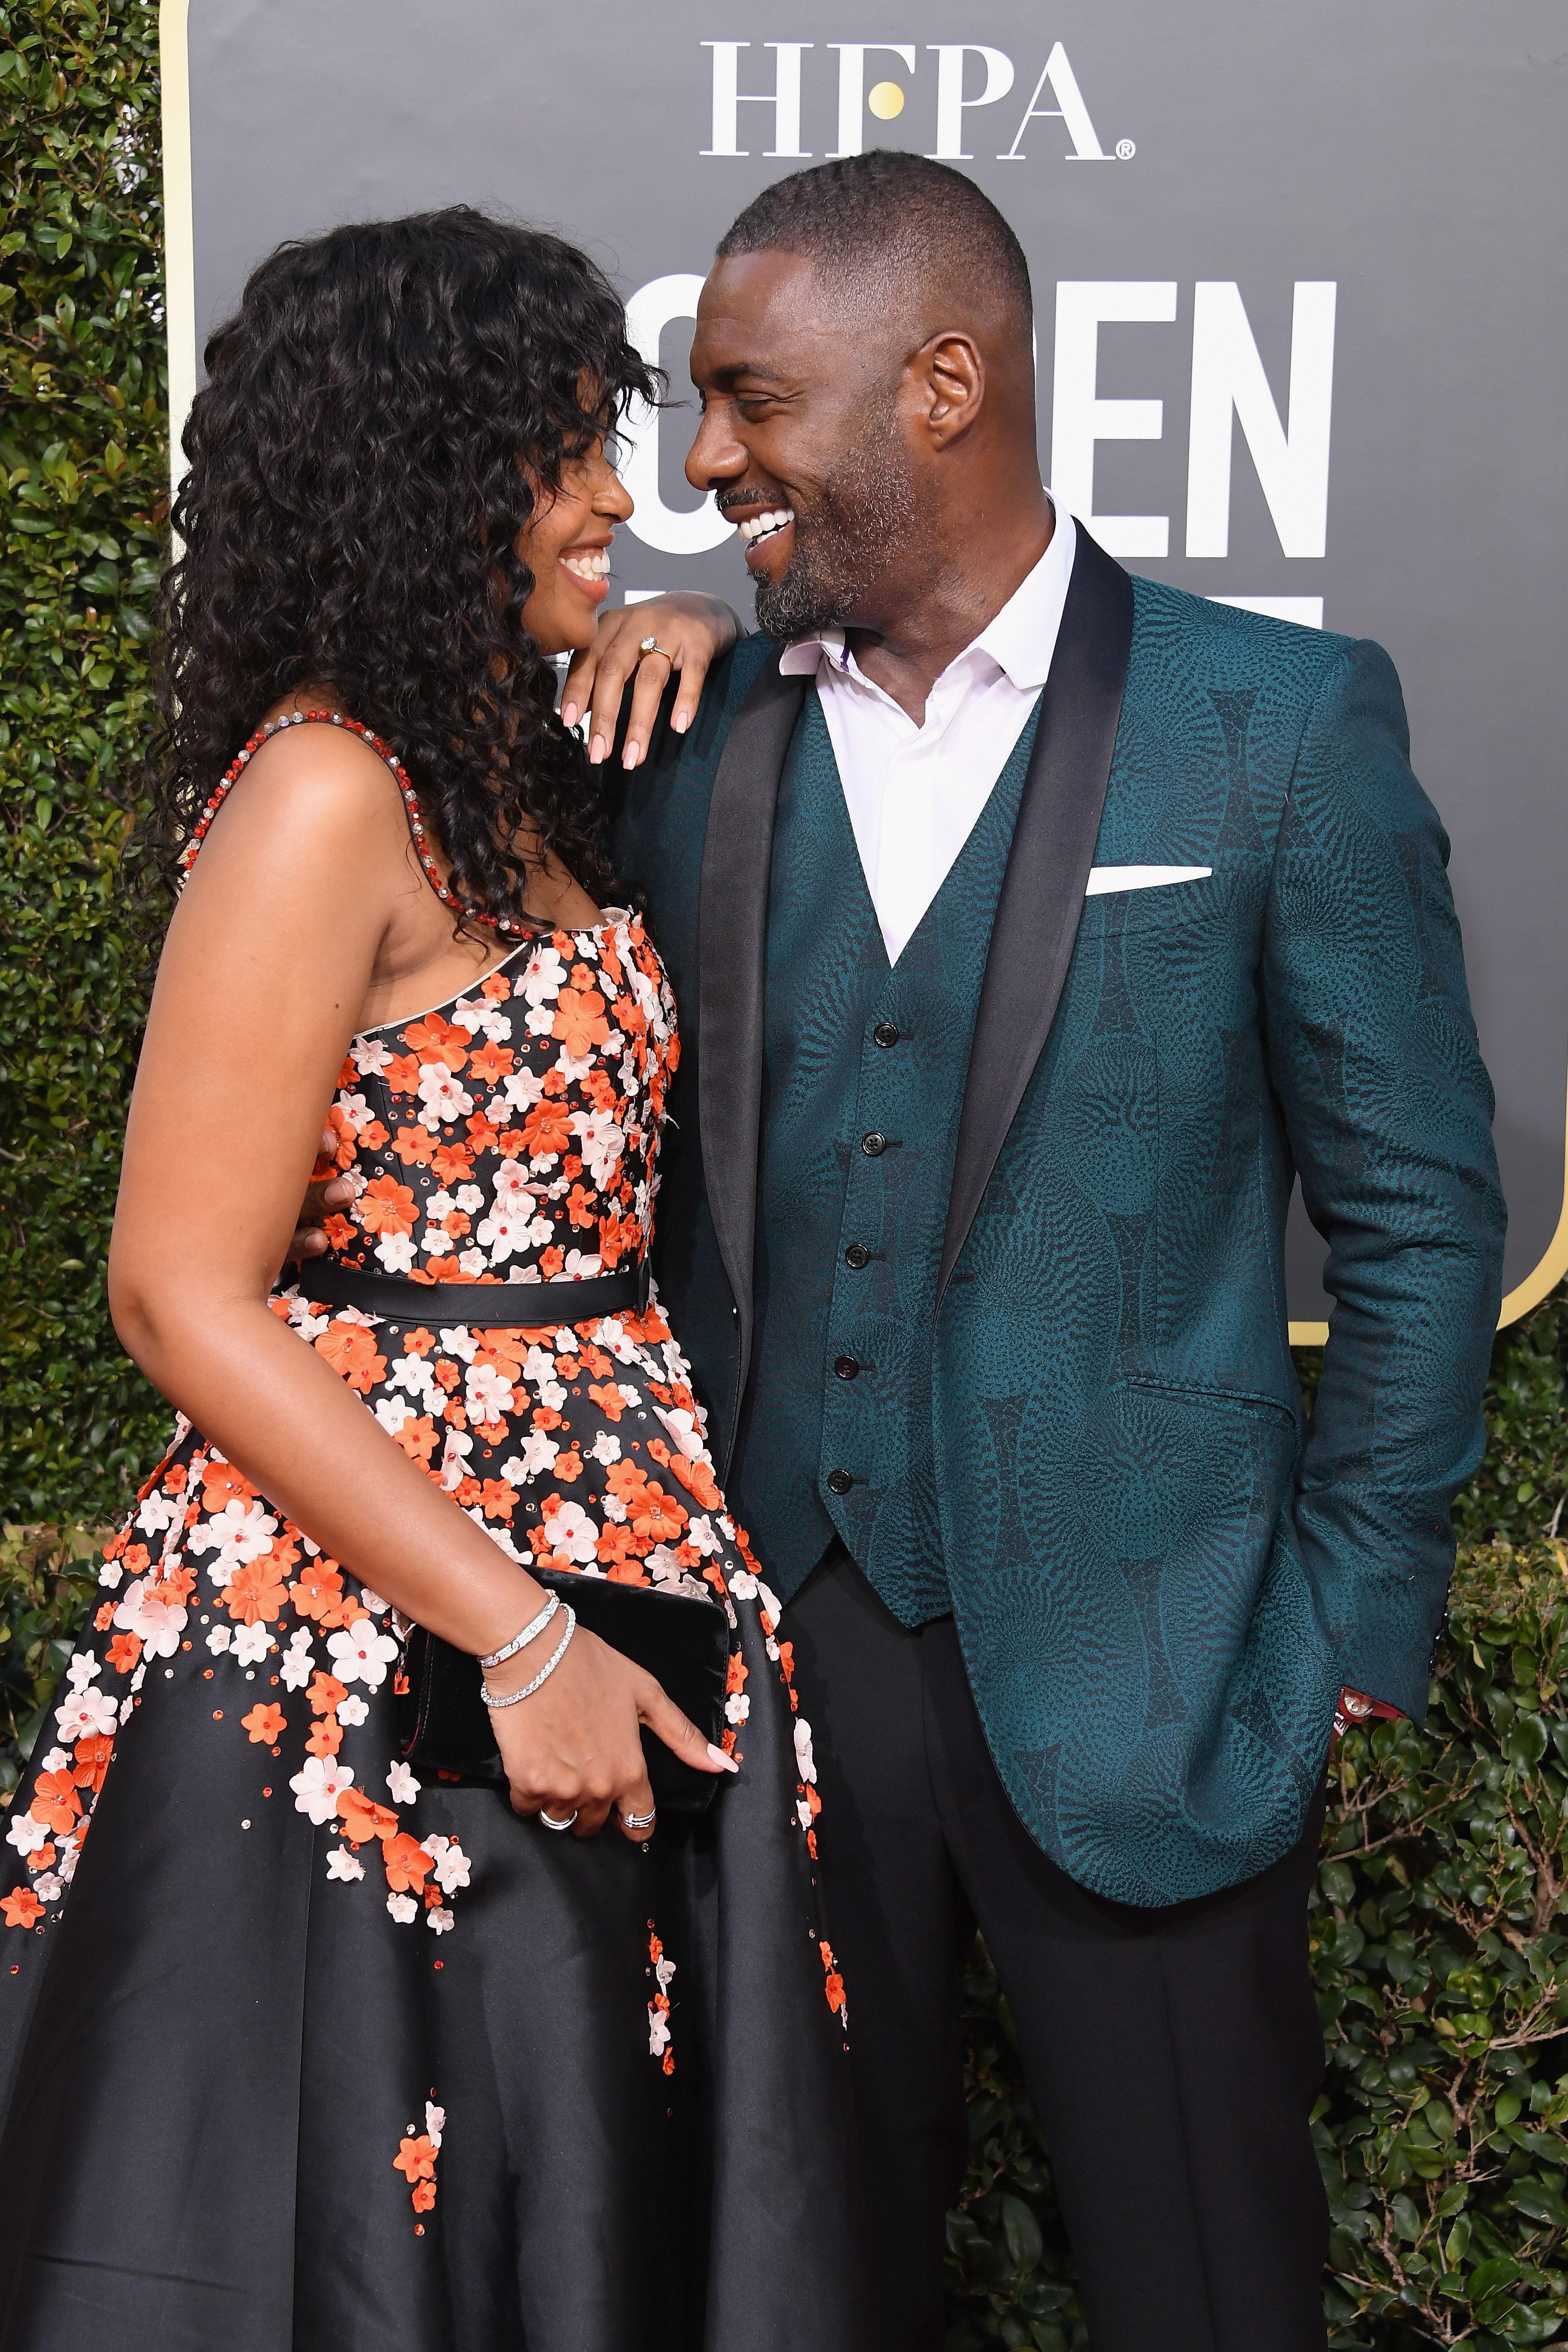 Who Is Idris Elbas Wife, Sabrina Dhowre Elba? picture